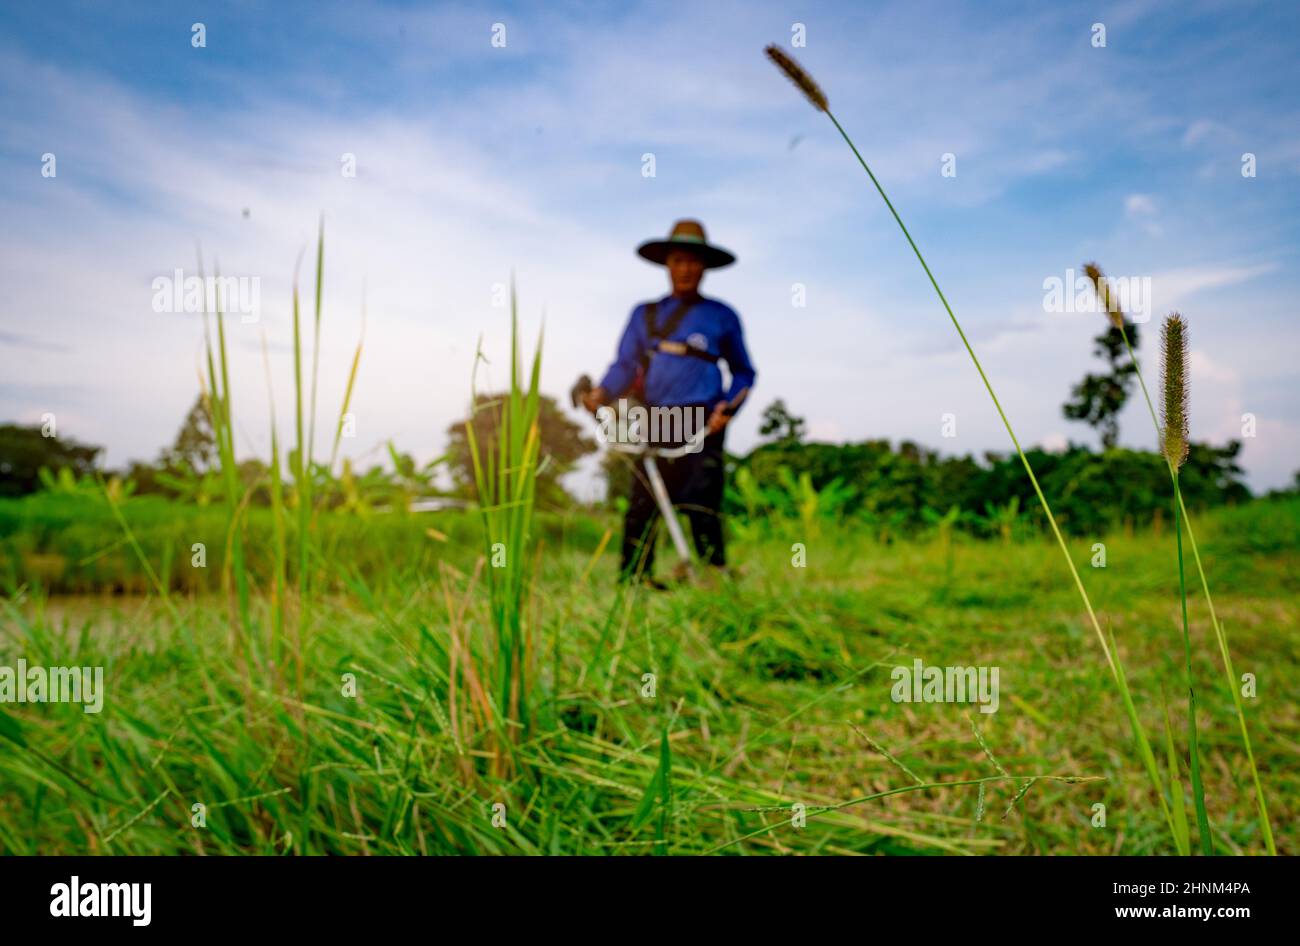 Grass flower on blurred man with shoulder lawn mower. Asian man cutting grass with lawn mower. Garden care and maintenance. Landscaping service. Man mowing green grass and weed for livestock food. Stock Photo